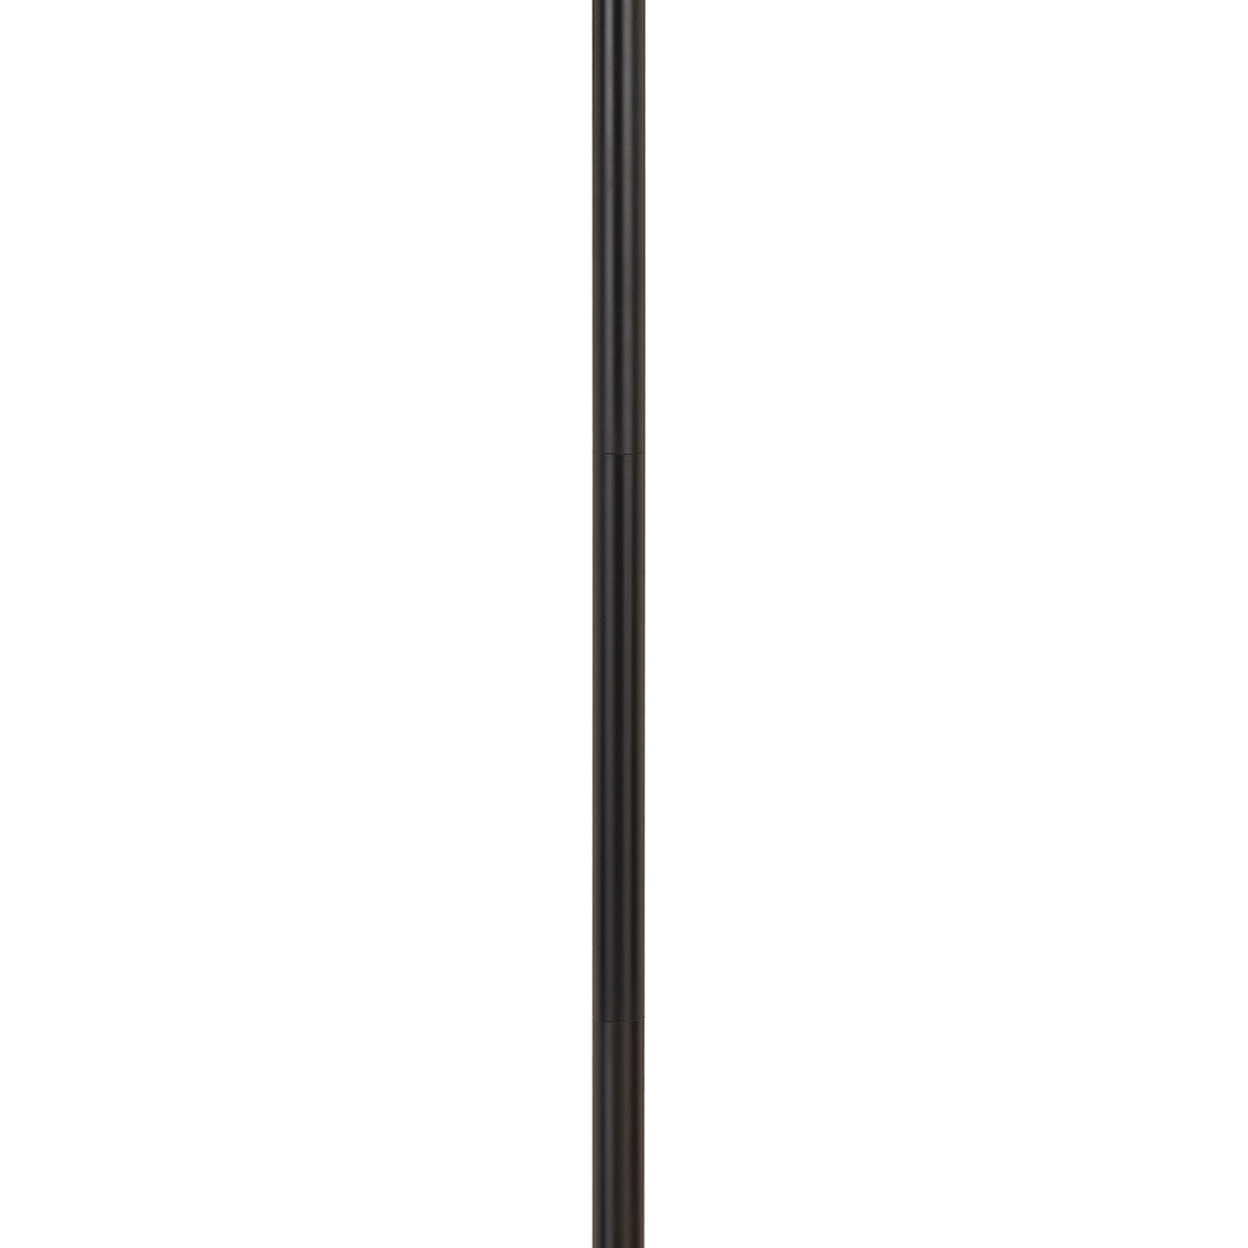 Polyresin Floor Lamp With Glass Shade And Pull Chain Switch, Black- Saltoro Sherpi